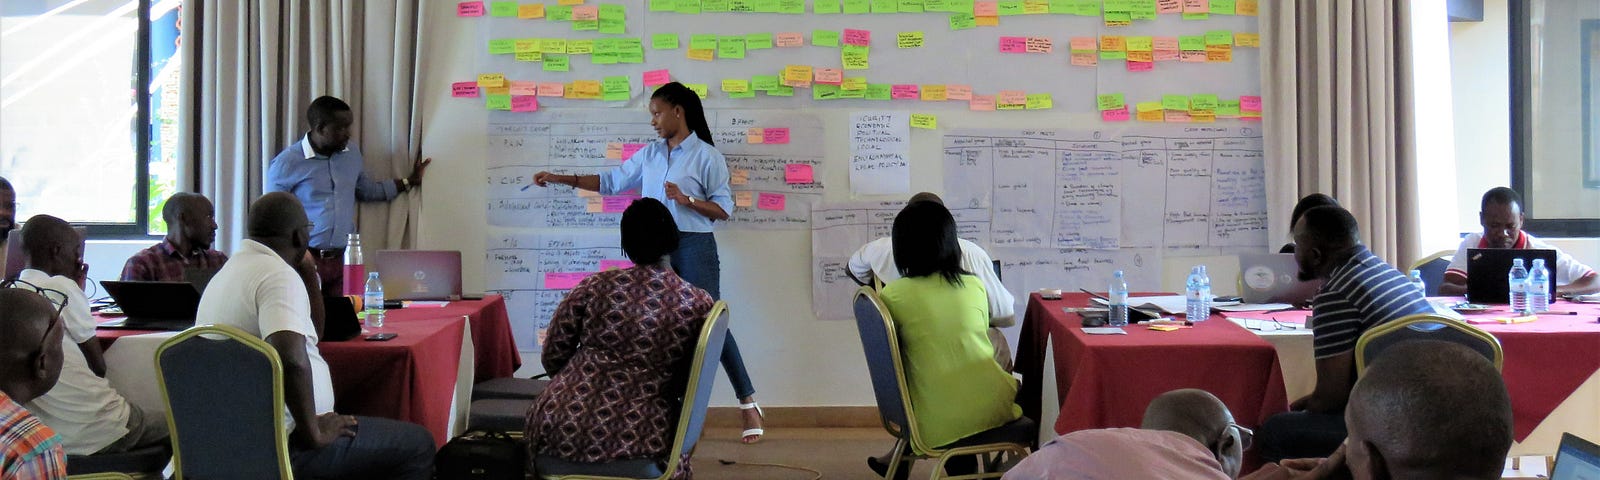 Two people stand in front of groups of people sitting at tables at a workshop. The two people in the front are pointing to a wall with paper and post-it notes taped to it.